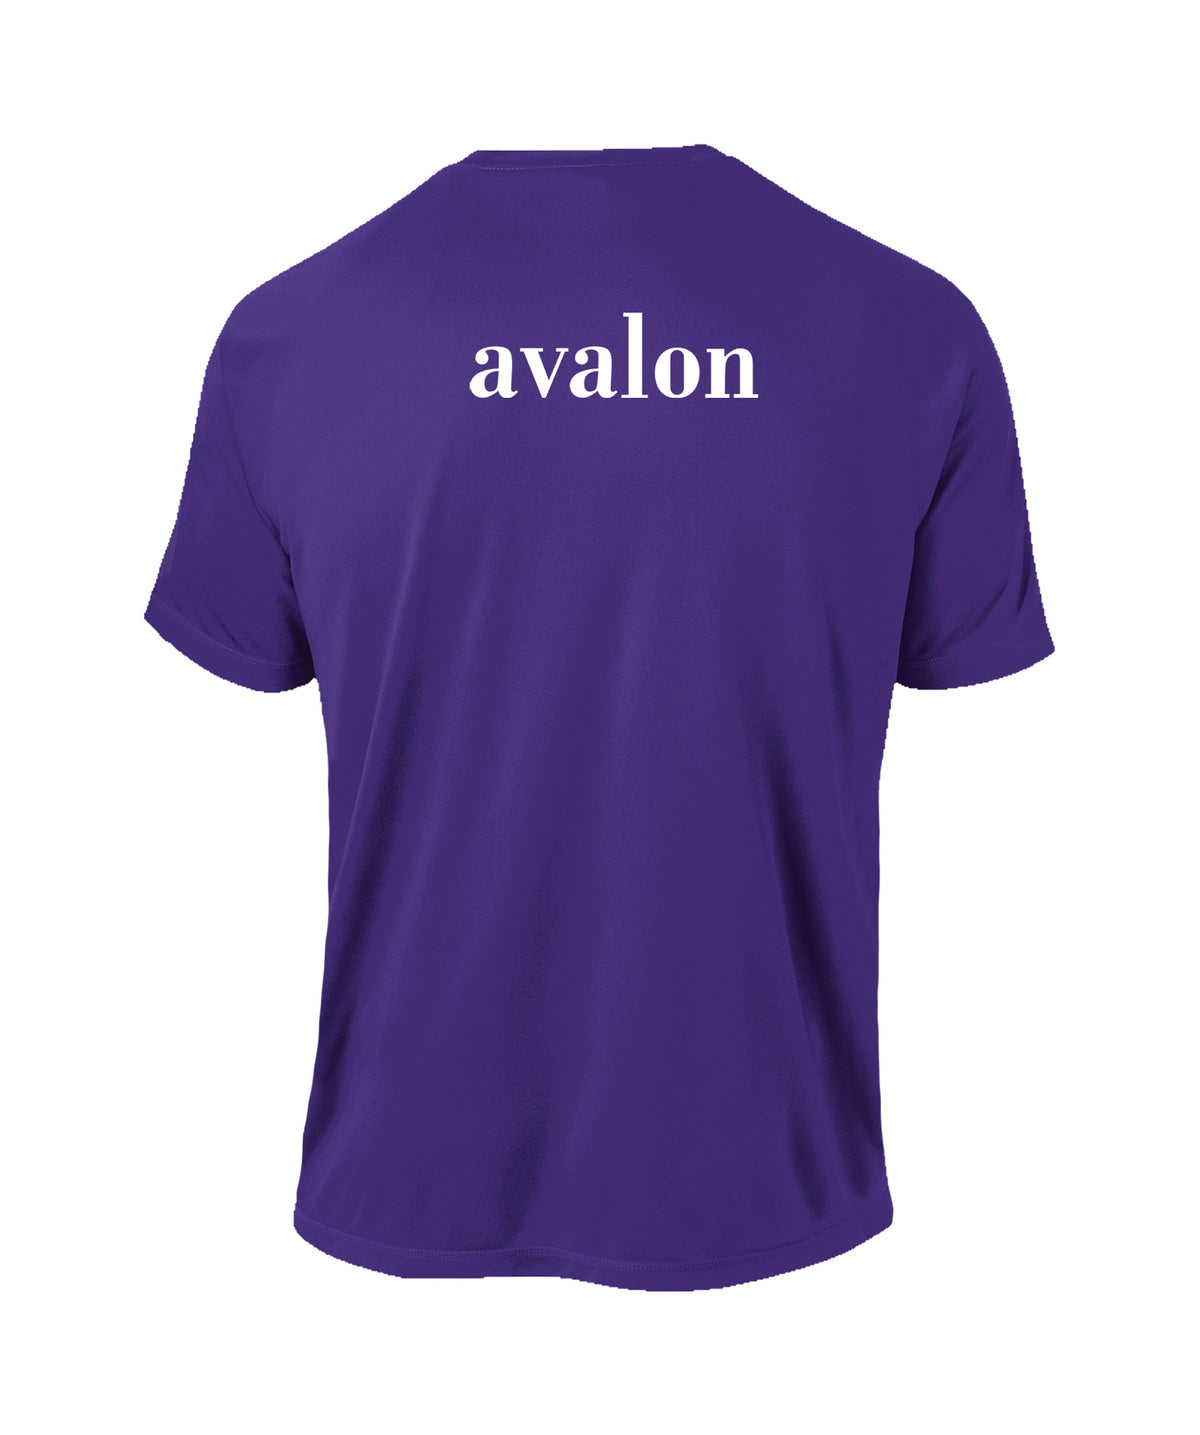 AVALON WICKING COMPETITION T-SHIRT - YOUTH